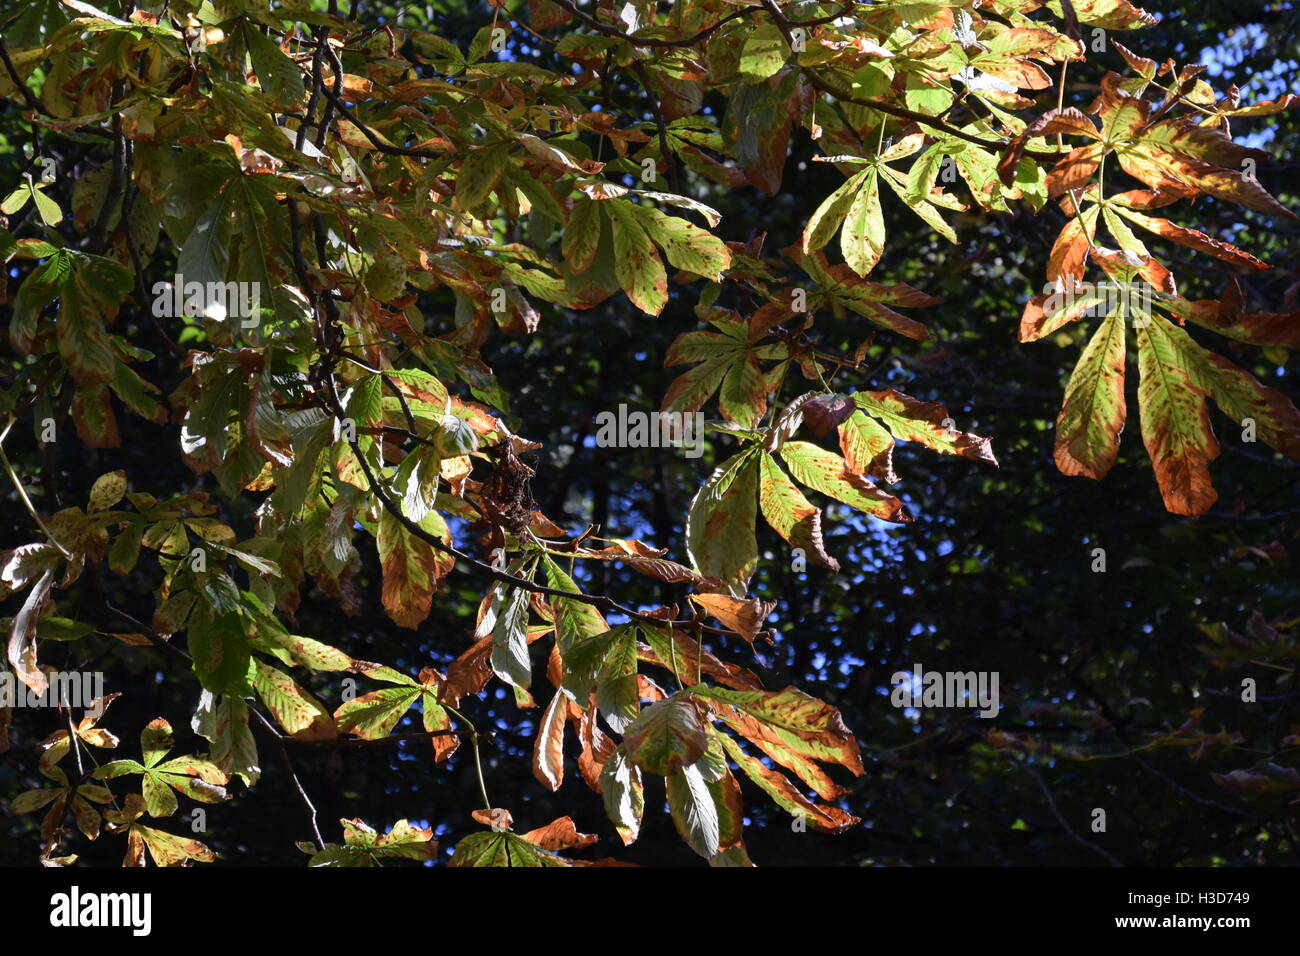 autumn leafs of a chest nut tree Stock Photo